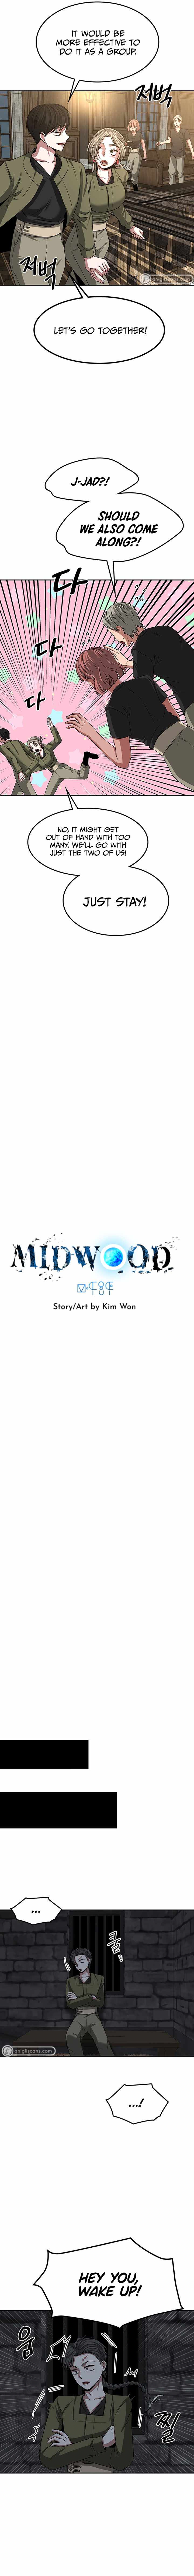 Midwood Chapter 10 #6